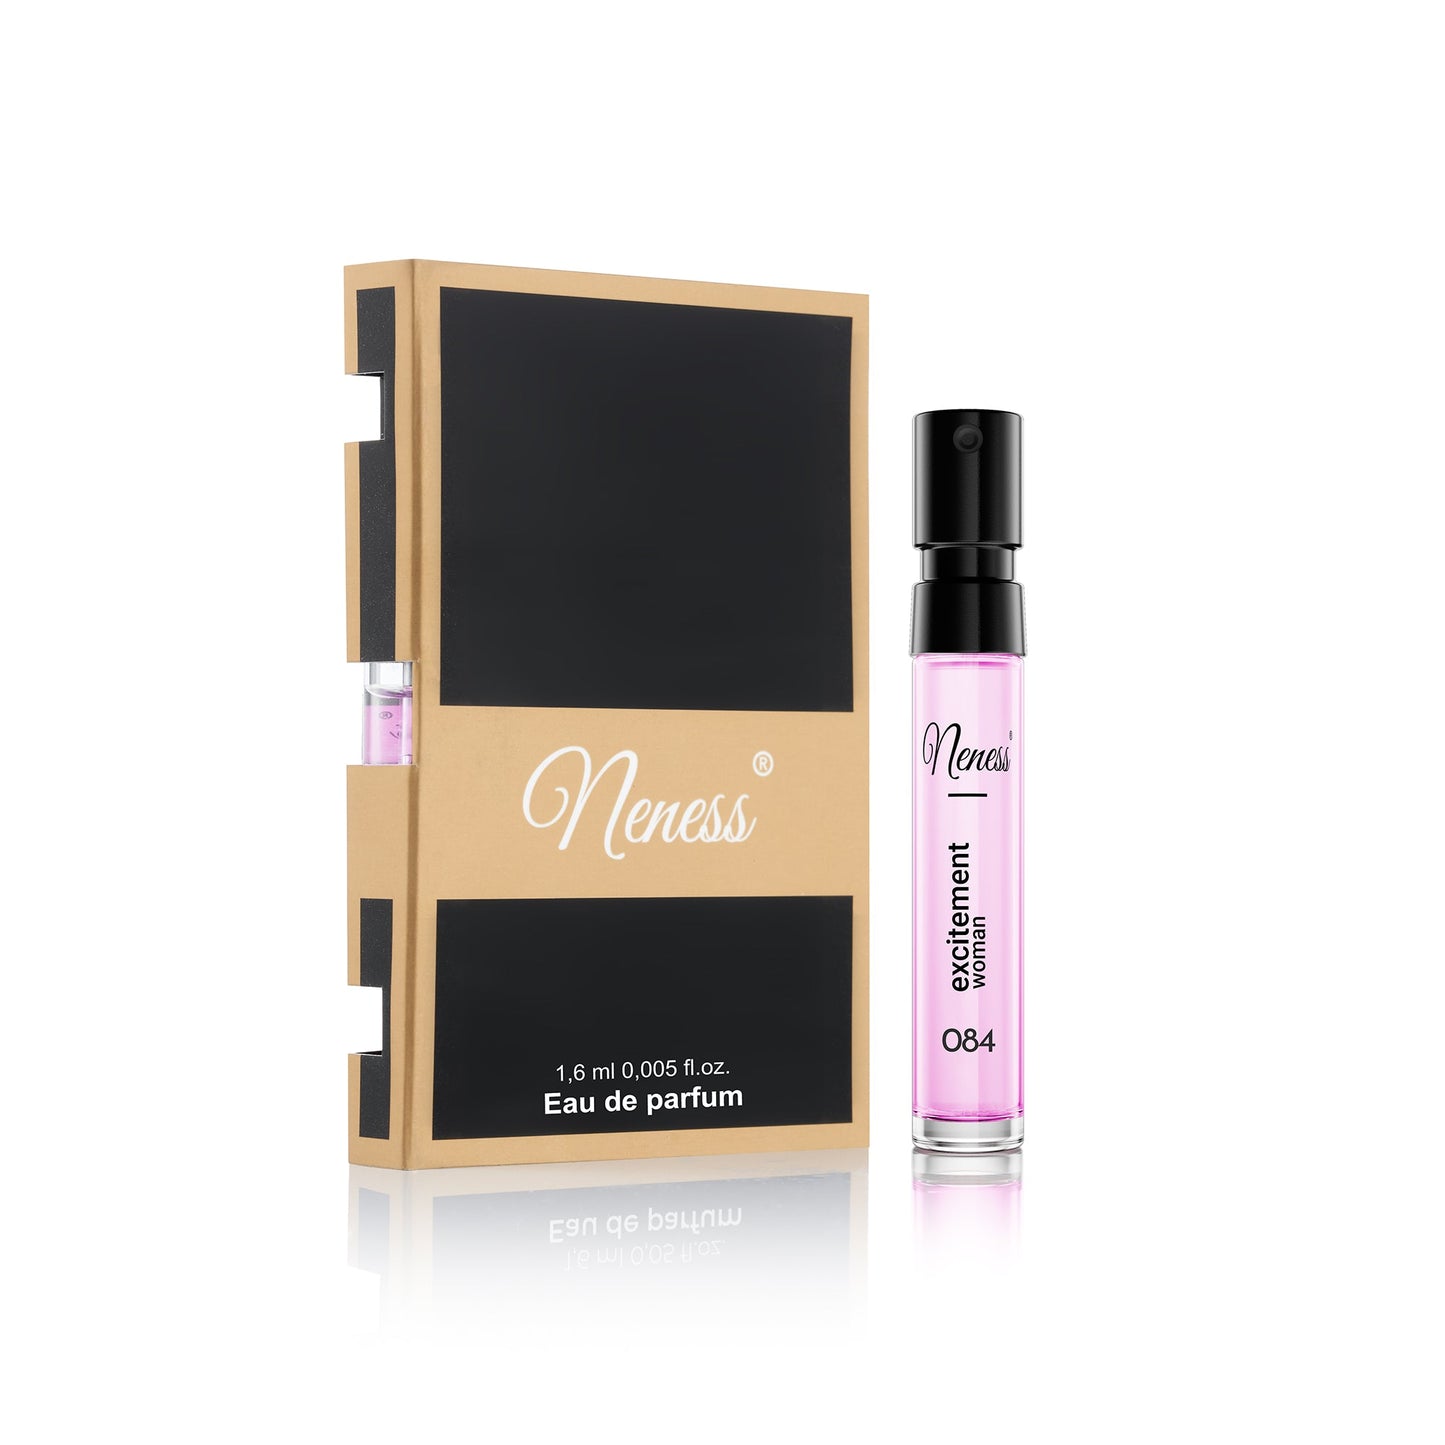 N084. Neness Excitement Woman - 1.6 ml sample - Perfume For Women